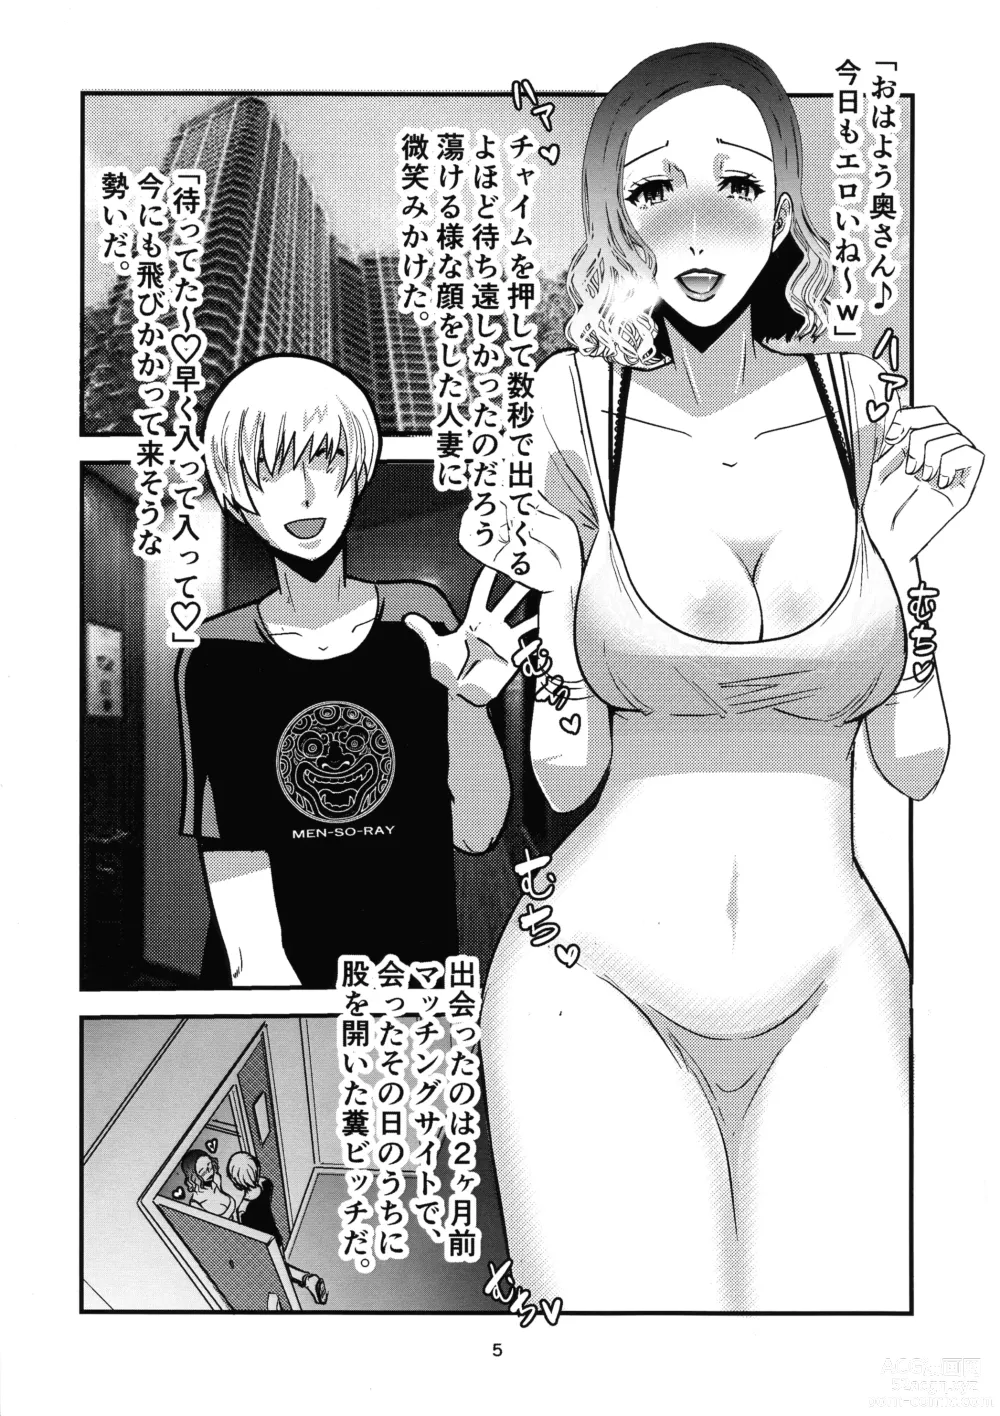 Page 5 of doujinshi Mansions & Milfs 2